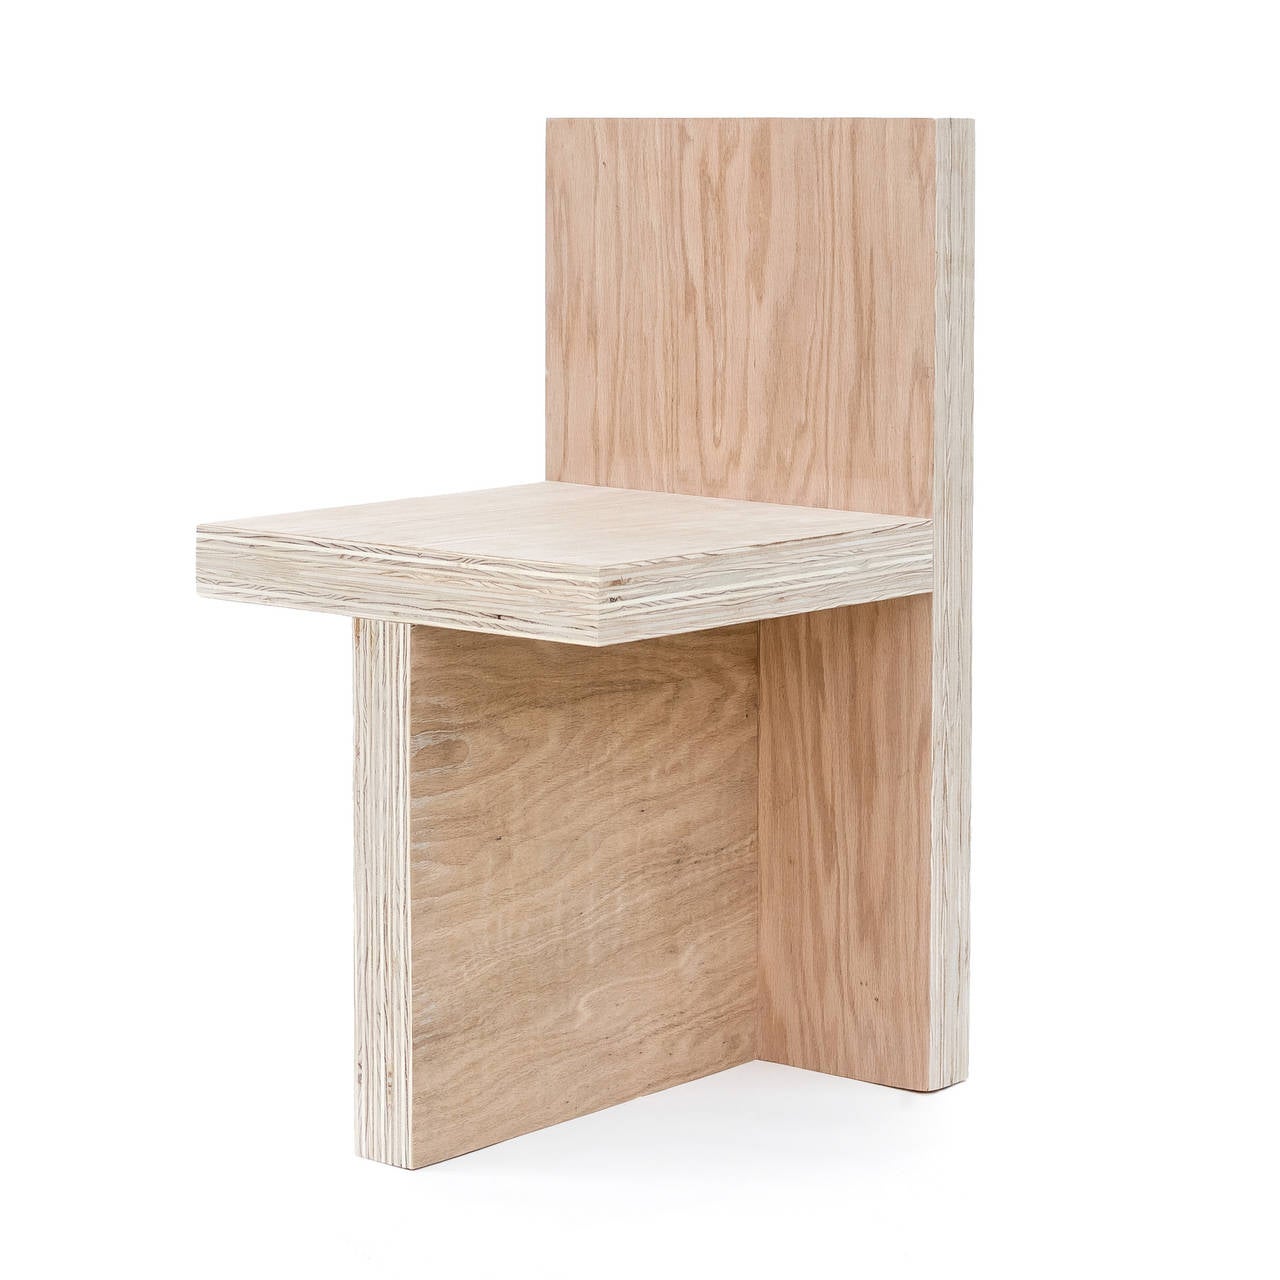 'Monument IV' Natural Plywood Chair by Lukas Machnik available from LMD/studio. 

A few months prior to shooting NBC's American Dream Builders, Lukas Machnik launched monument, a collection of minimal hardwood furniture composed of intersecting